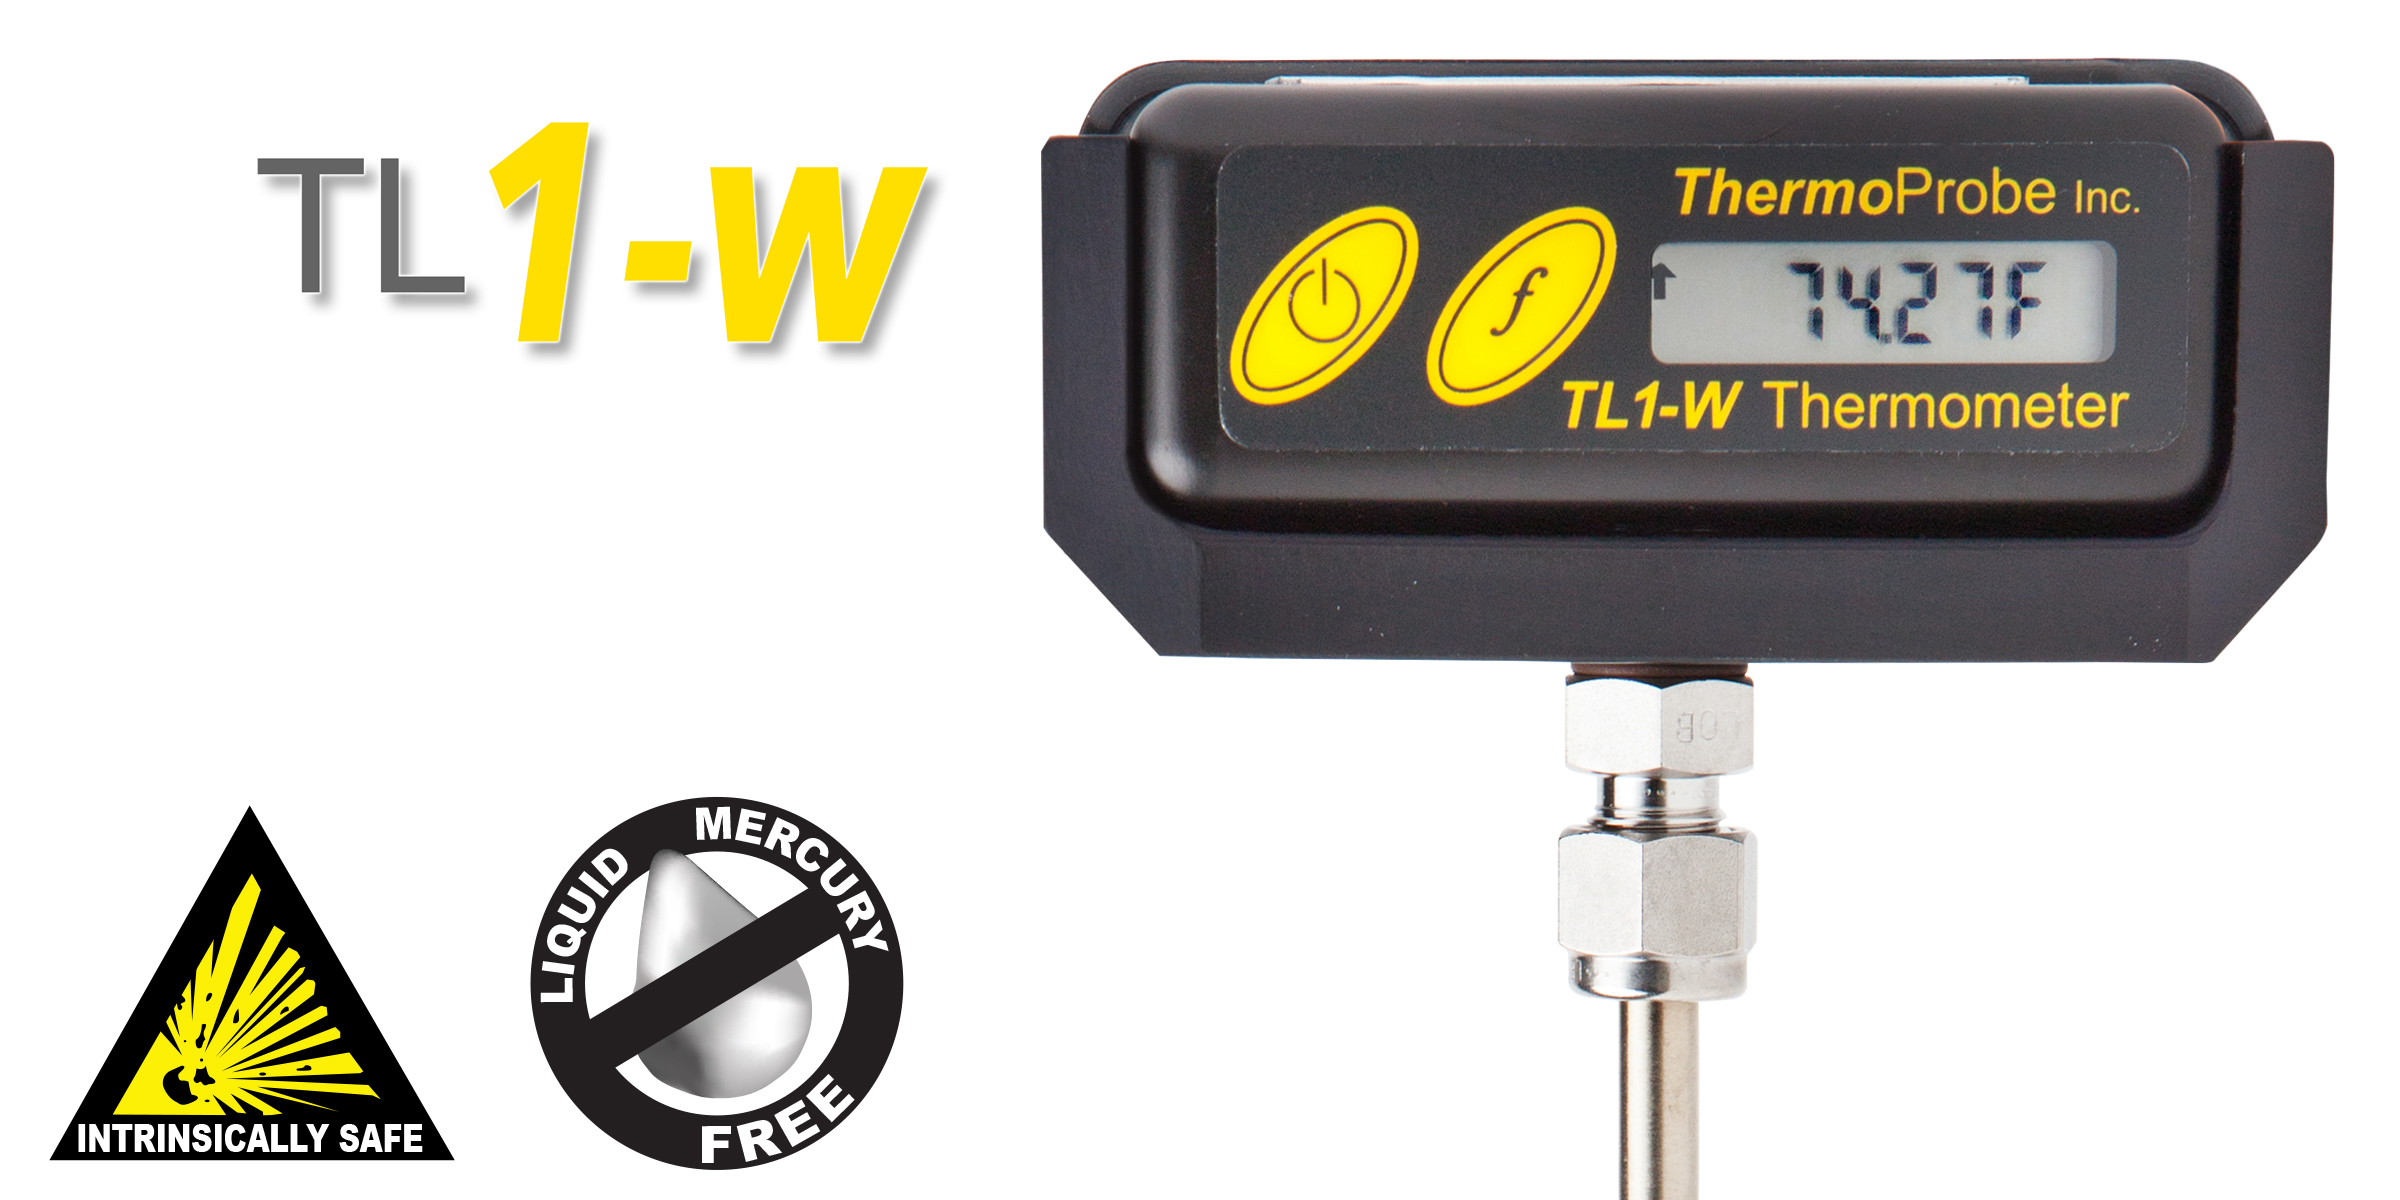 Features for the ThermoProbe TL1-W